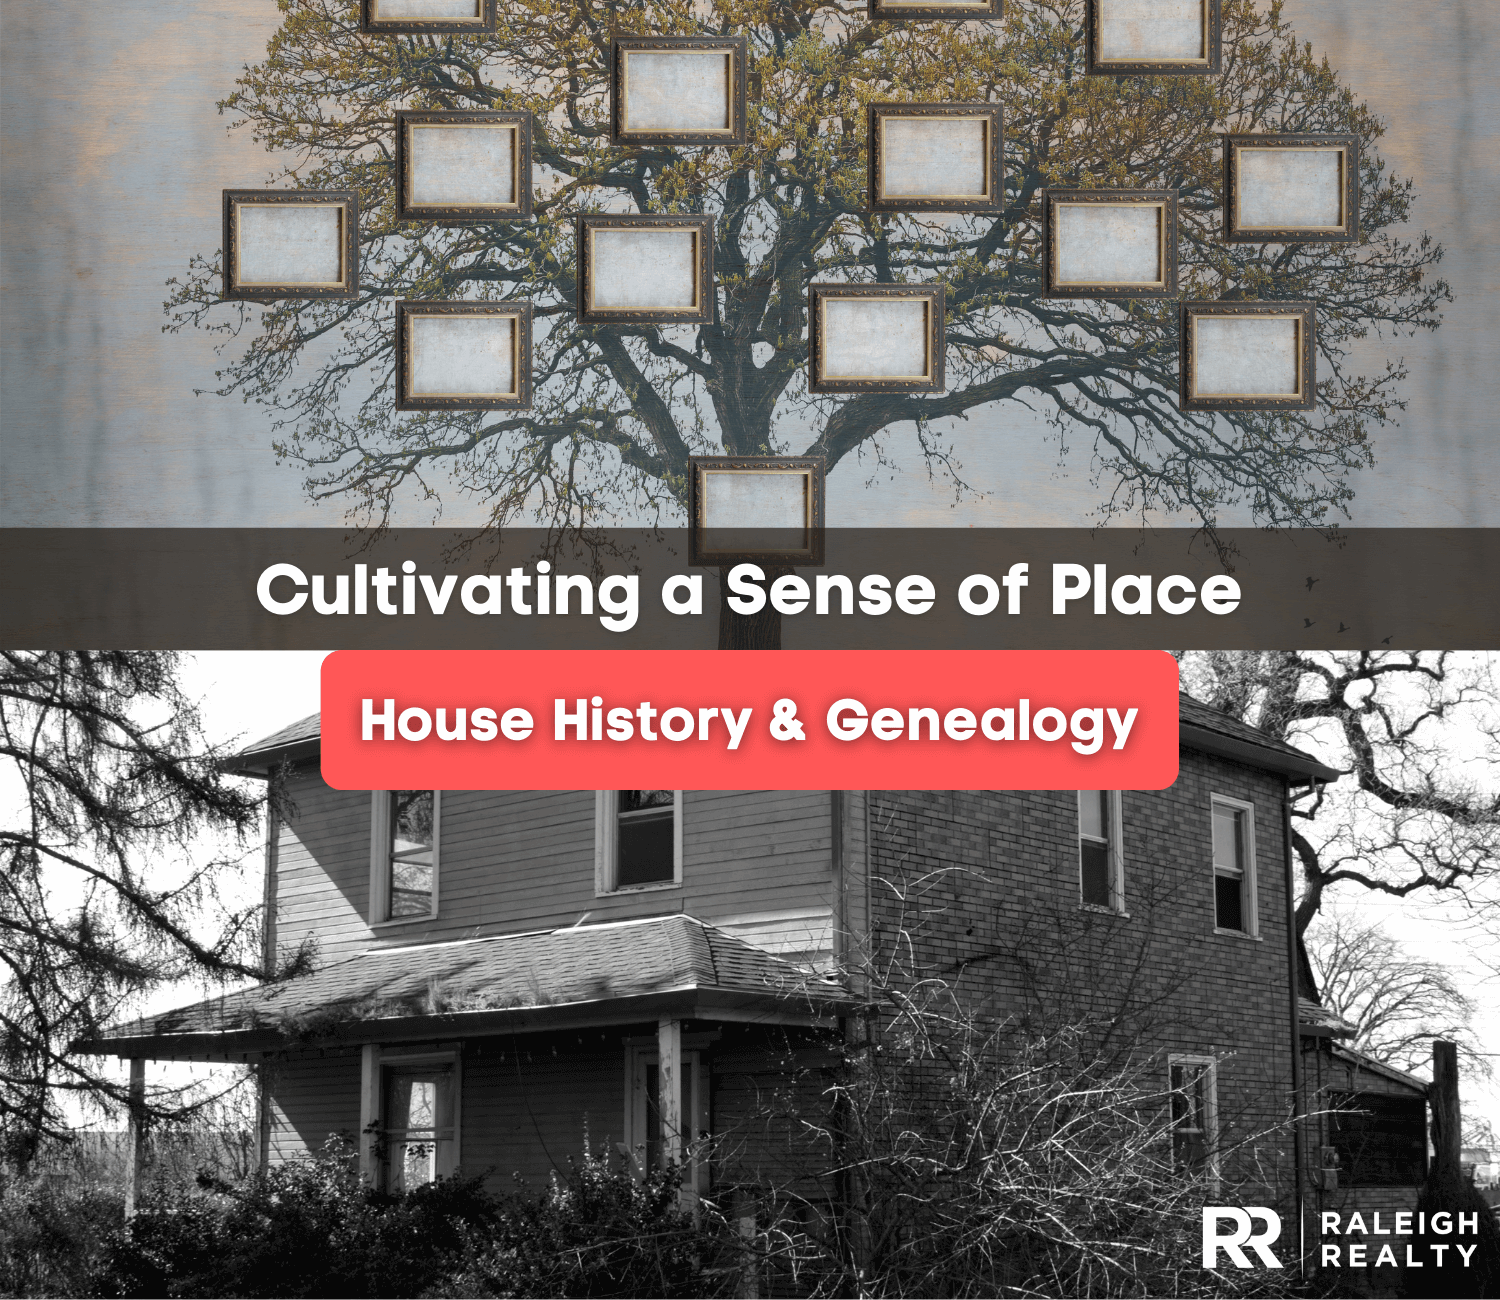 House History & Genealogy: Cultivating a Sense of Place through Genealogy, Home History, & Neighborhood Research